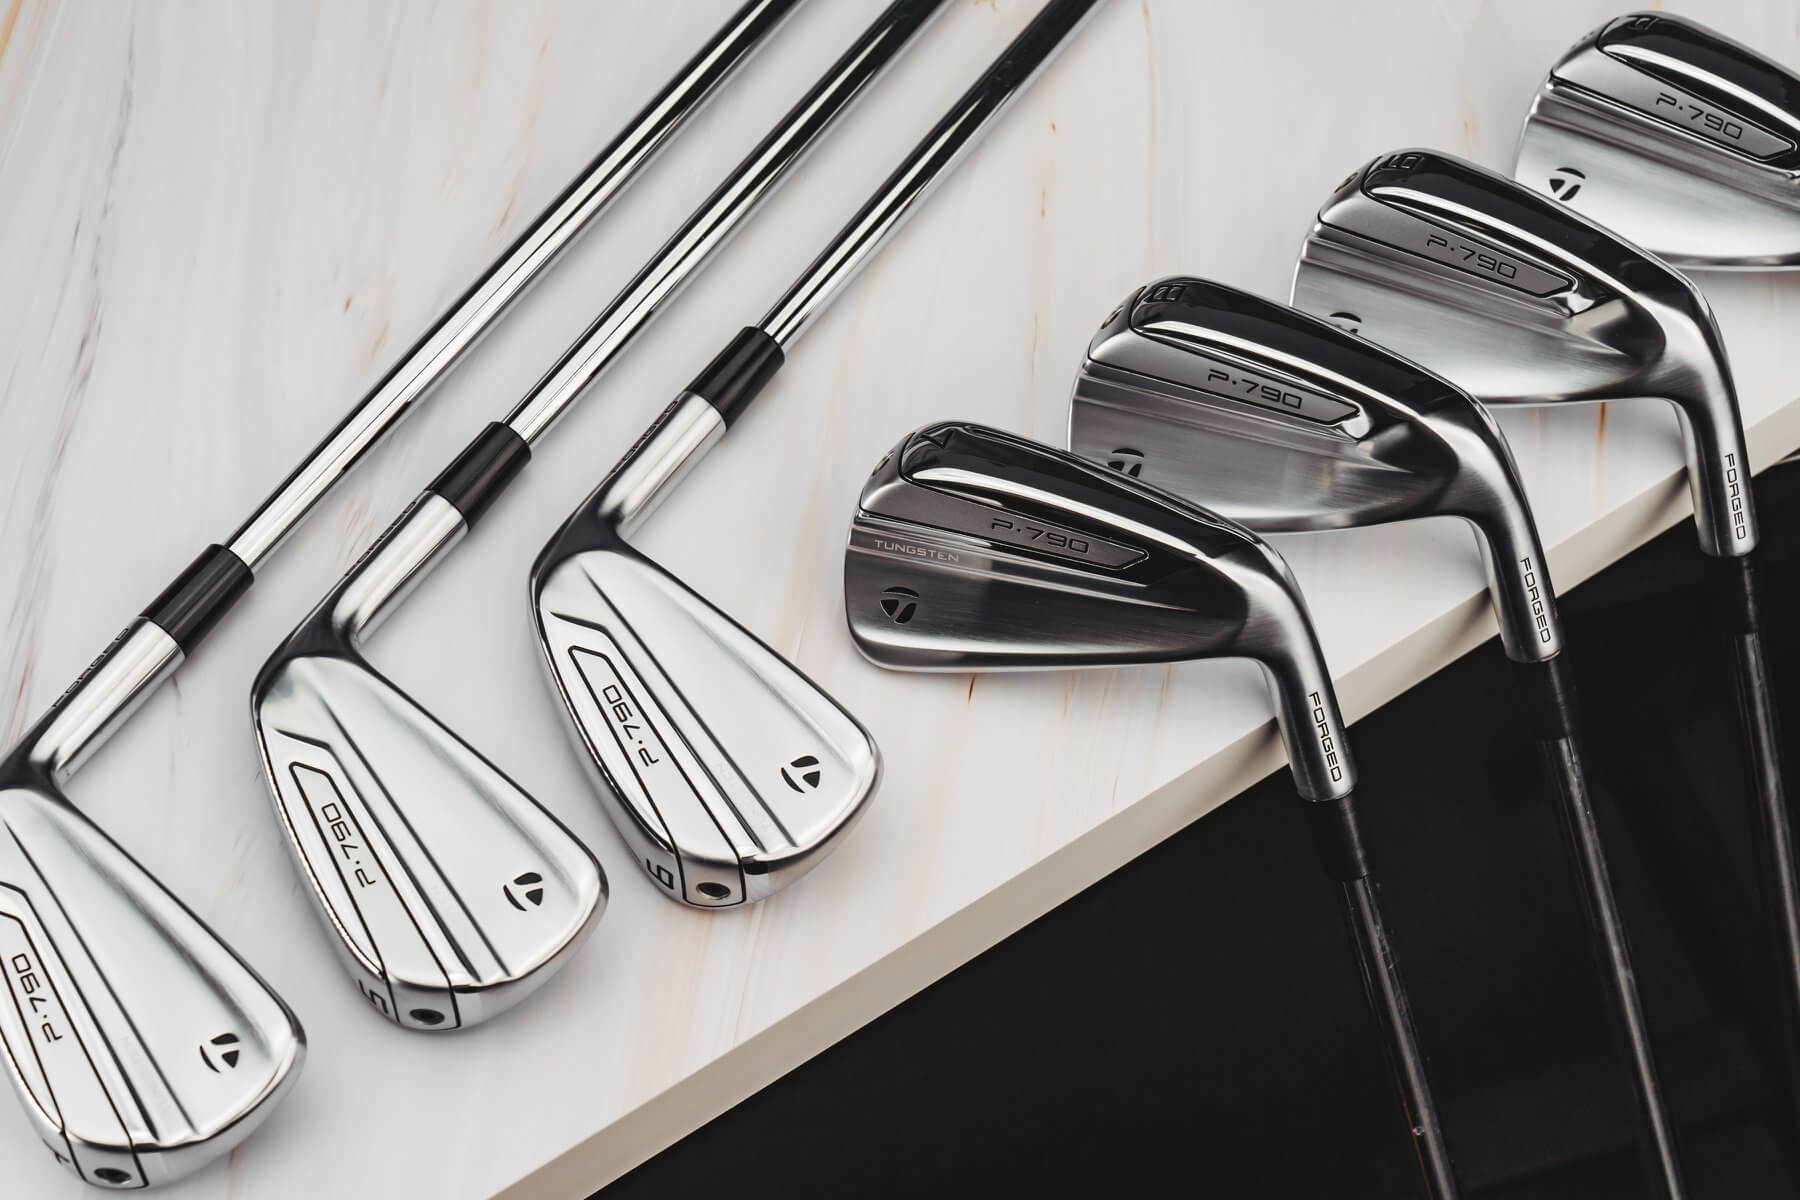 The P790 Irons from TaylorMade - PAN-WEST